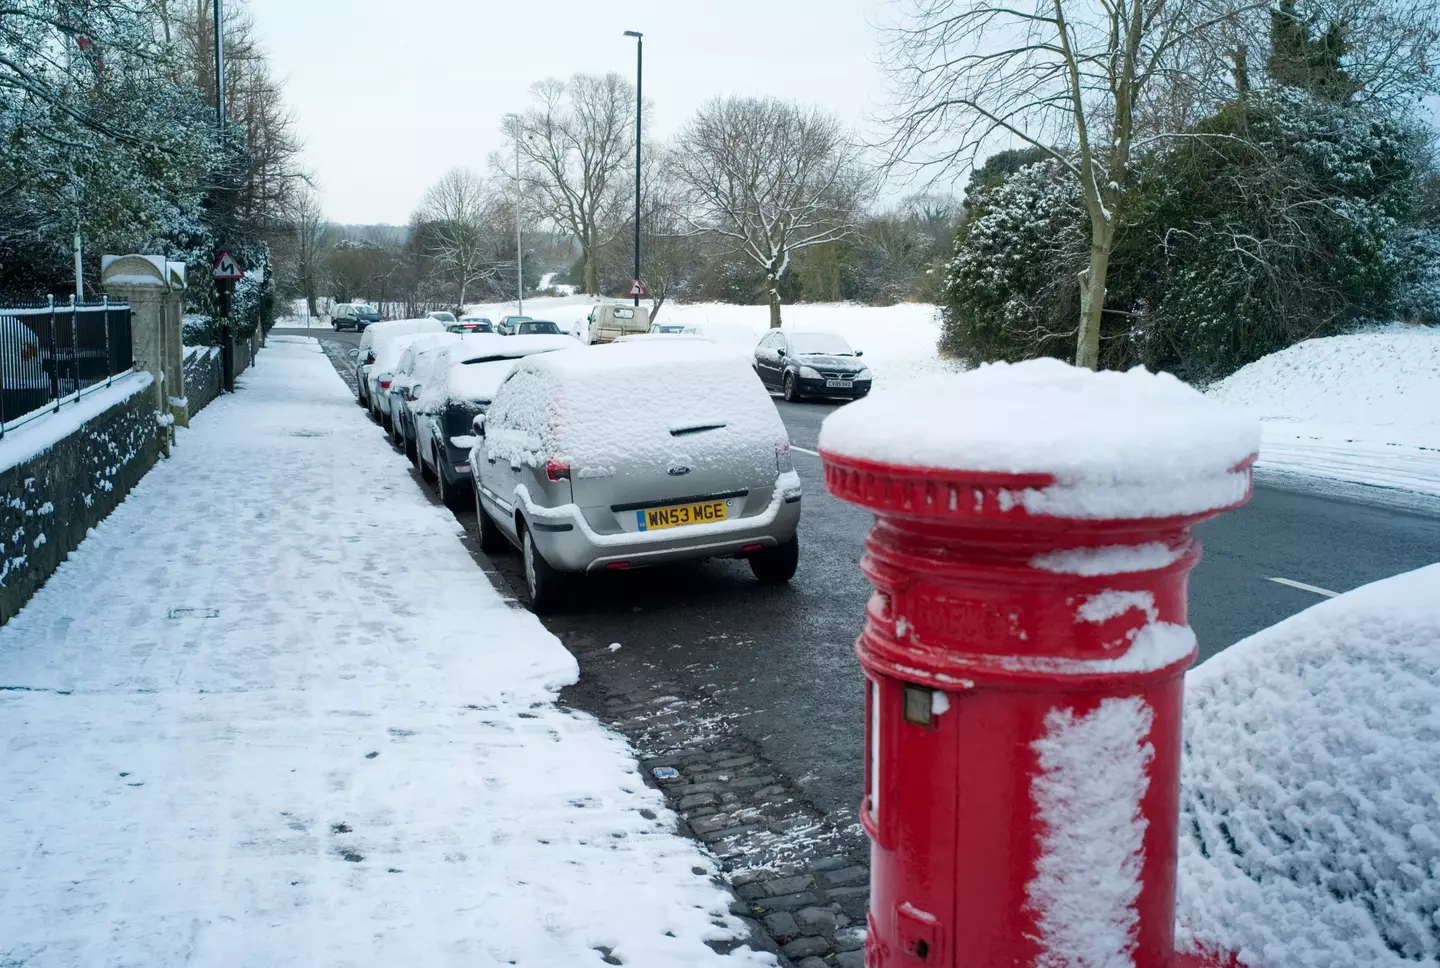 Brits could be in for a White Christmas.